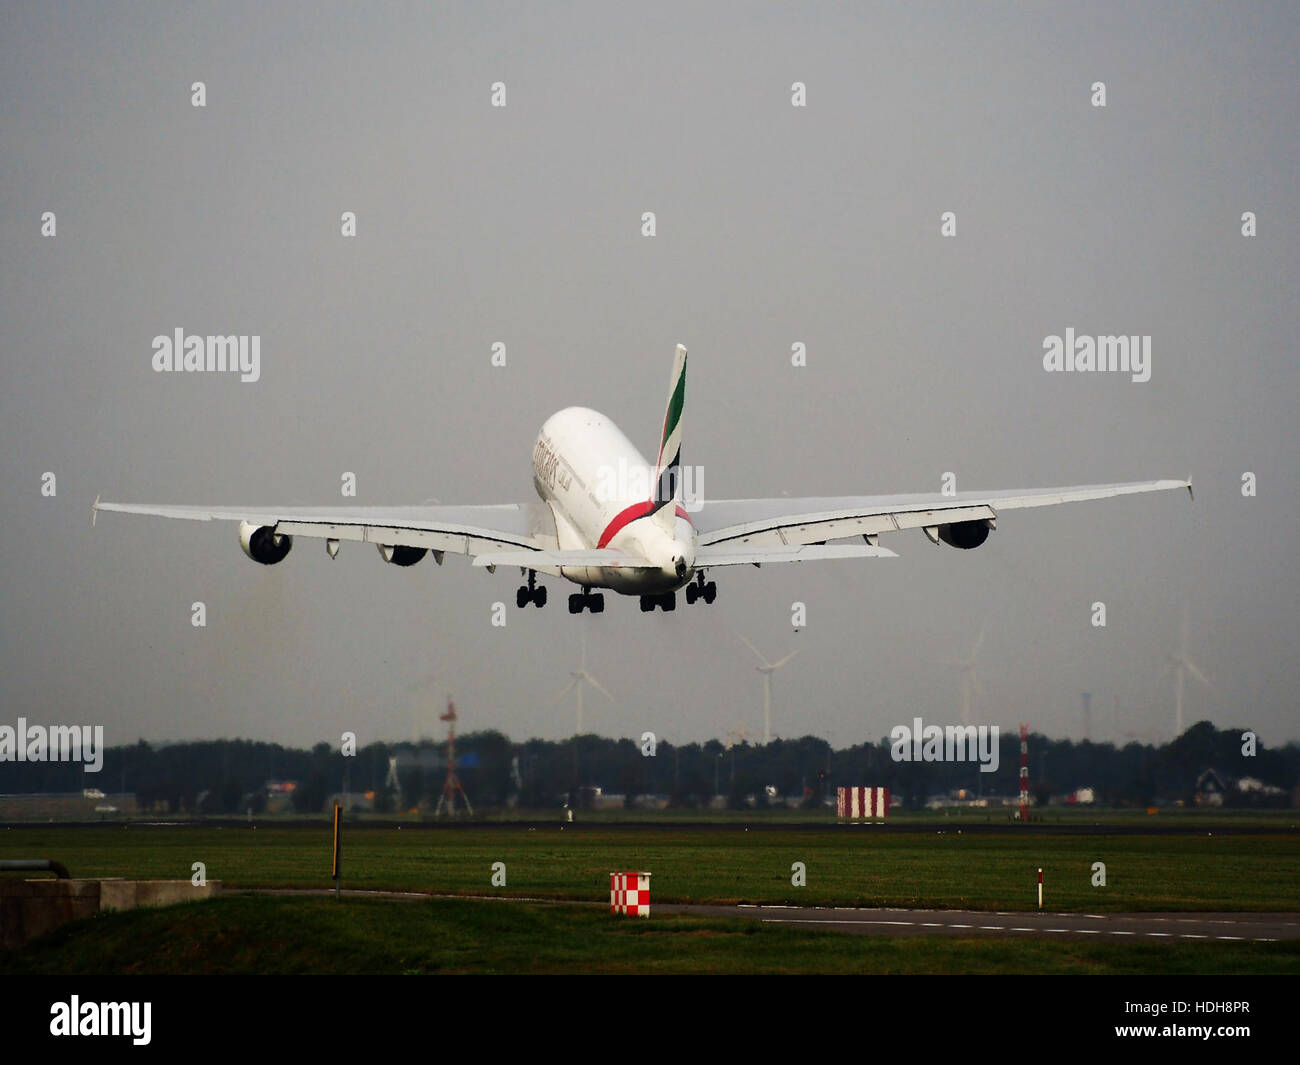 A6-EOW (Flugzeuge) auf Schiphol pic8 Stockfoto